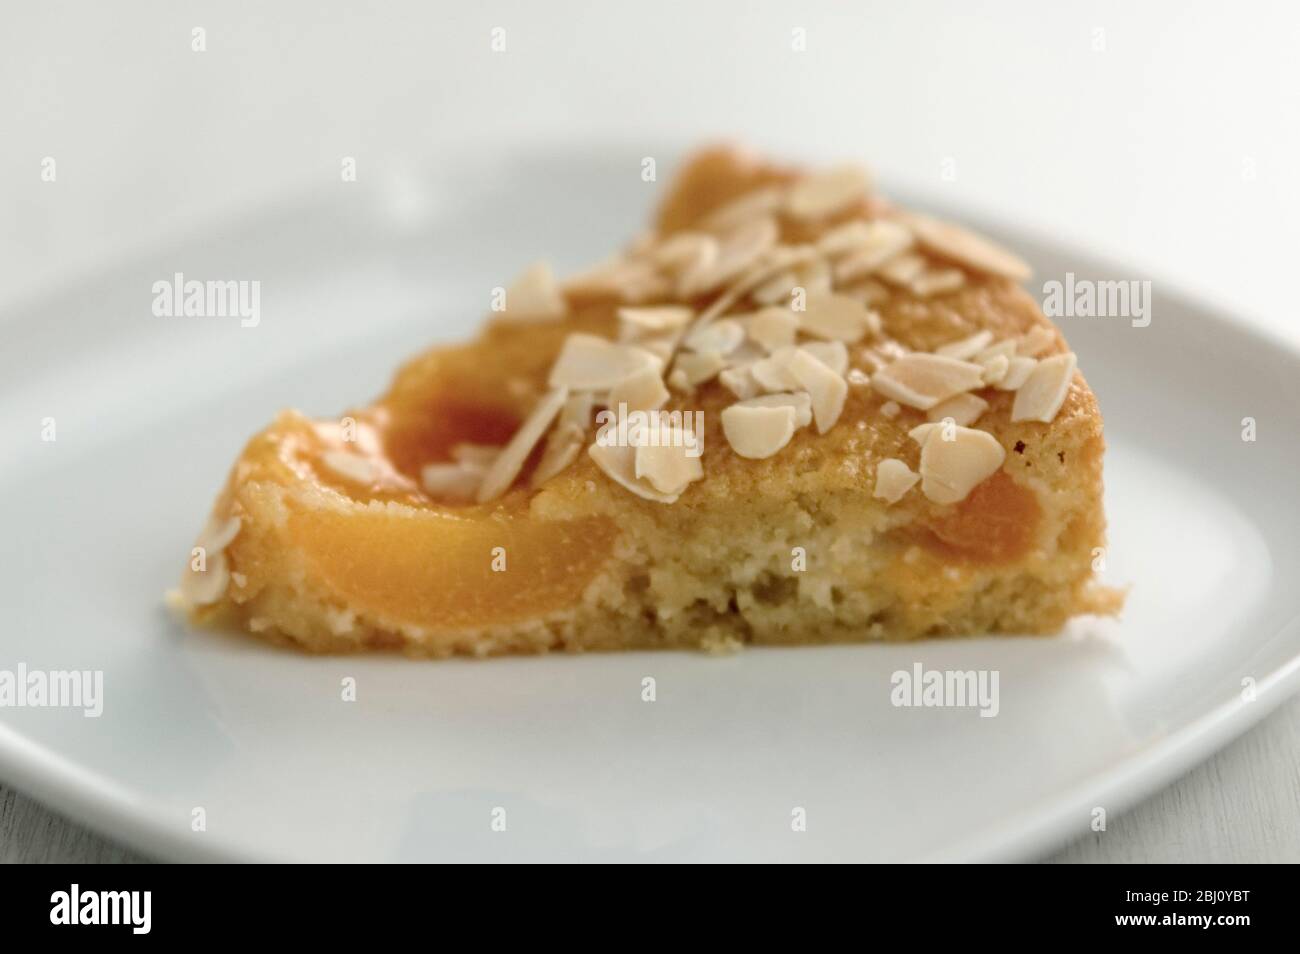 Slice of apricot cake on small white plate - Stock Photo